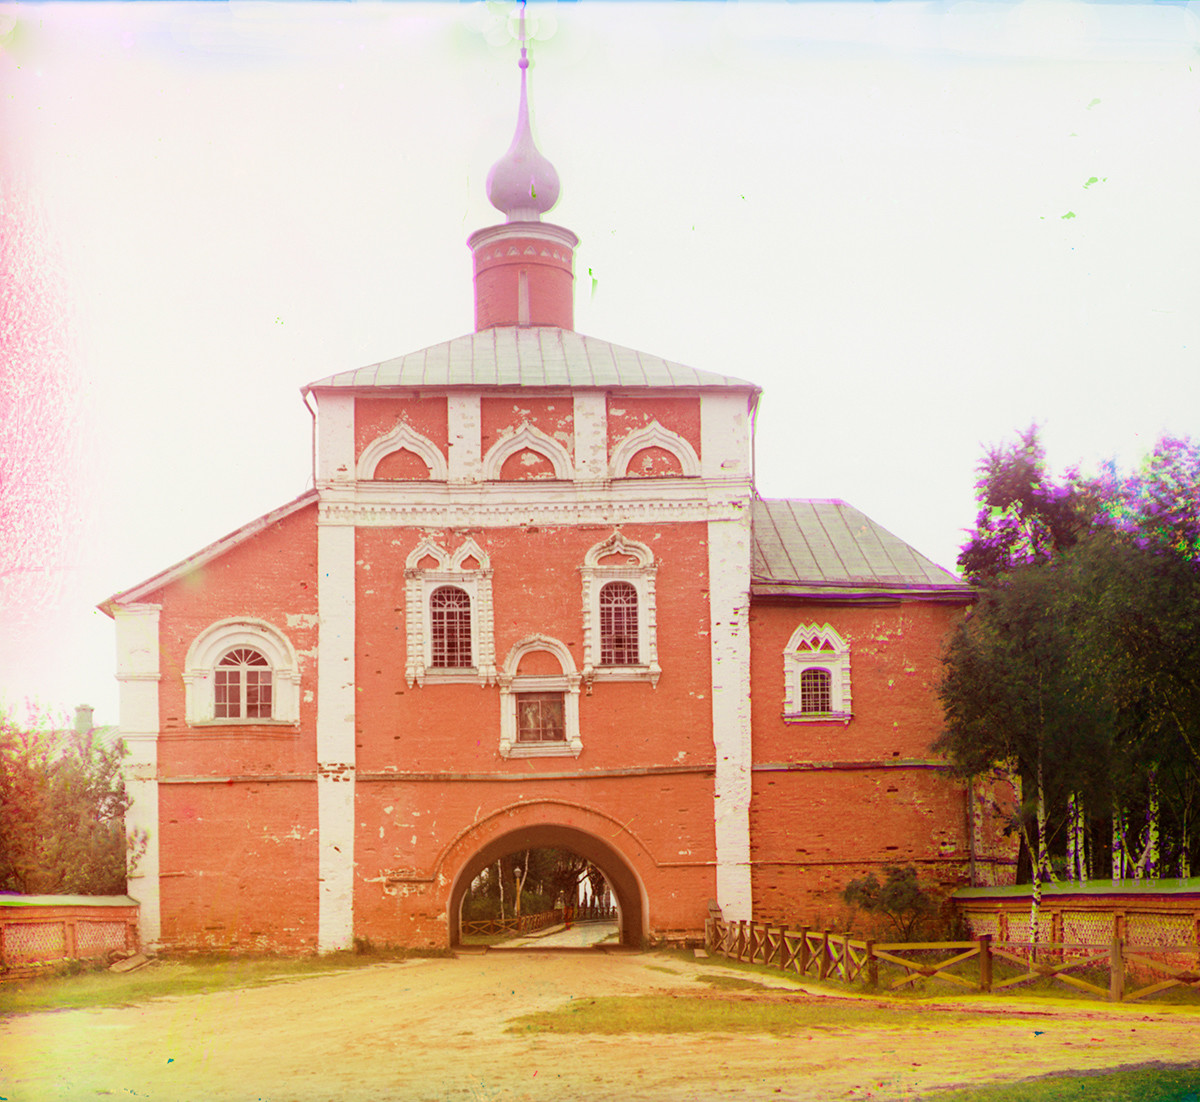 Savior-St. Evfimy Monastery. Church of the Annunciation over Holy Gate, south view. Summer 1912